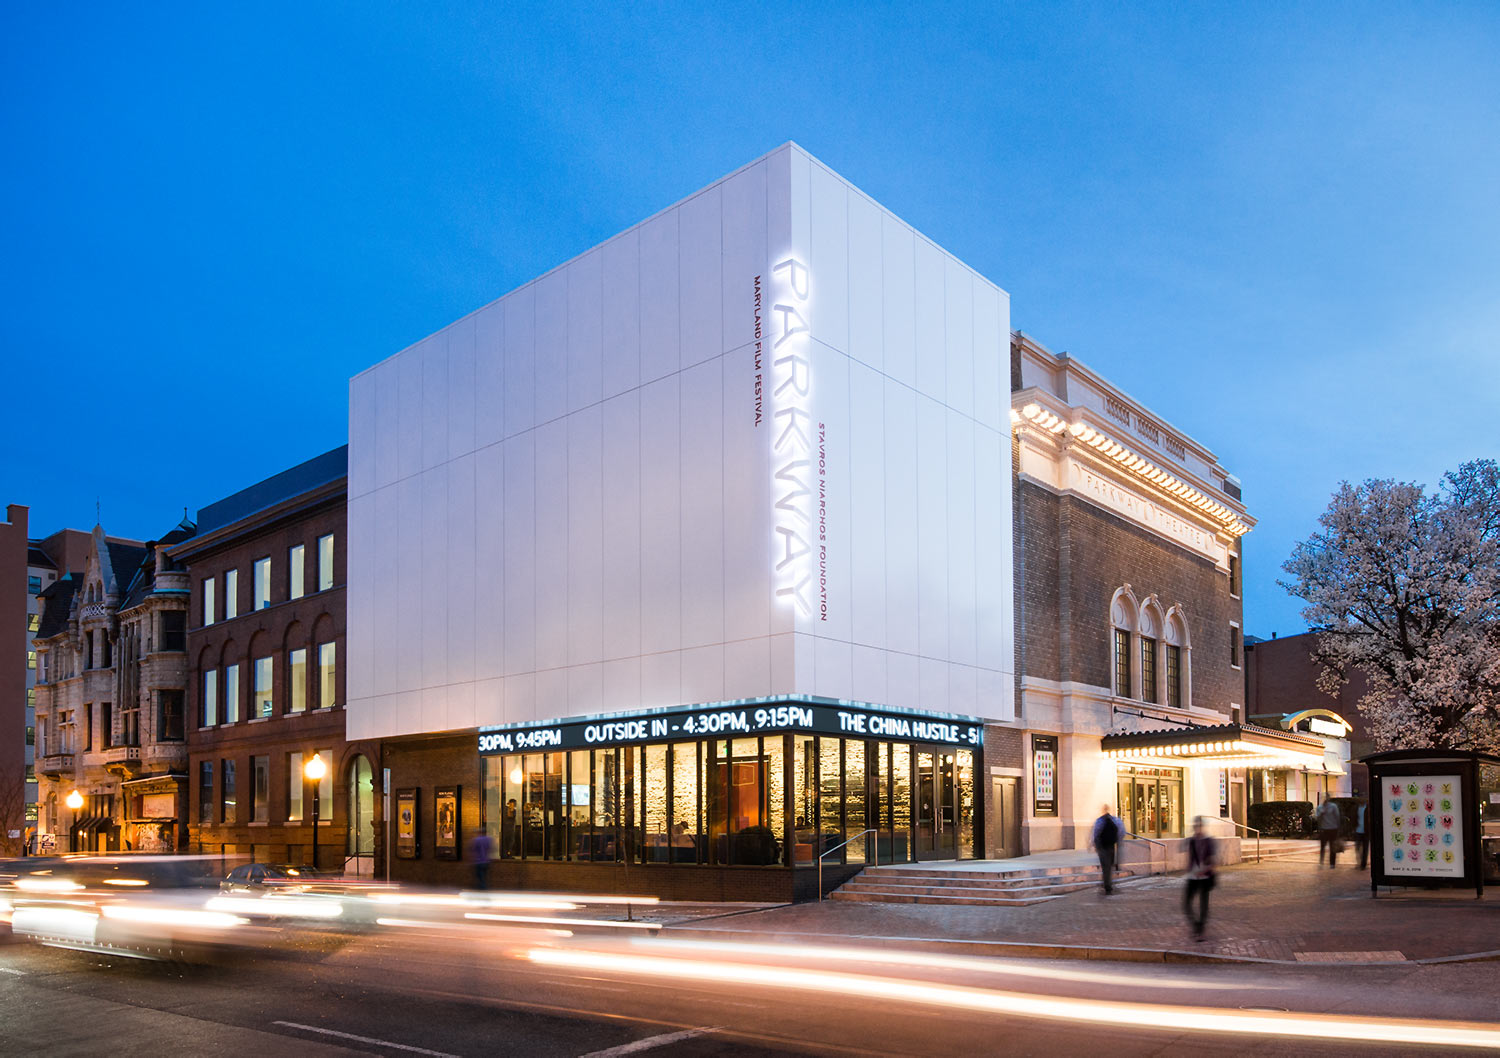 MdFF SNF Parkway Theatre in Baltimore, a contemporary film center and movie theater design and architecture